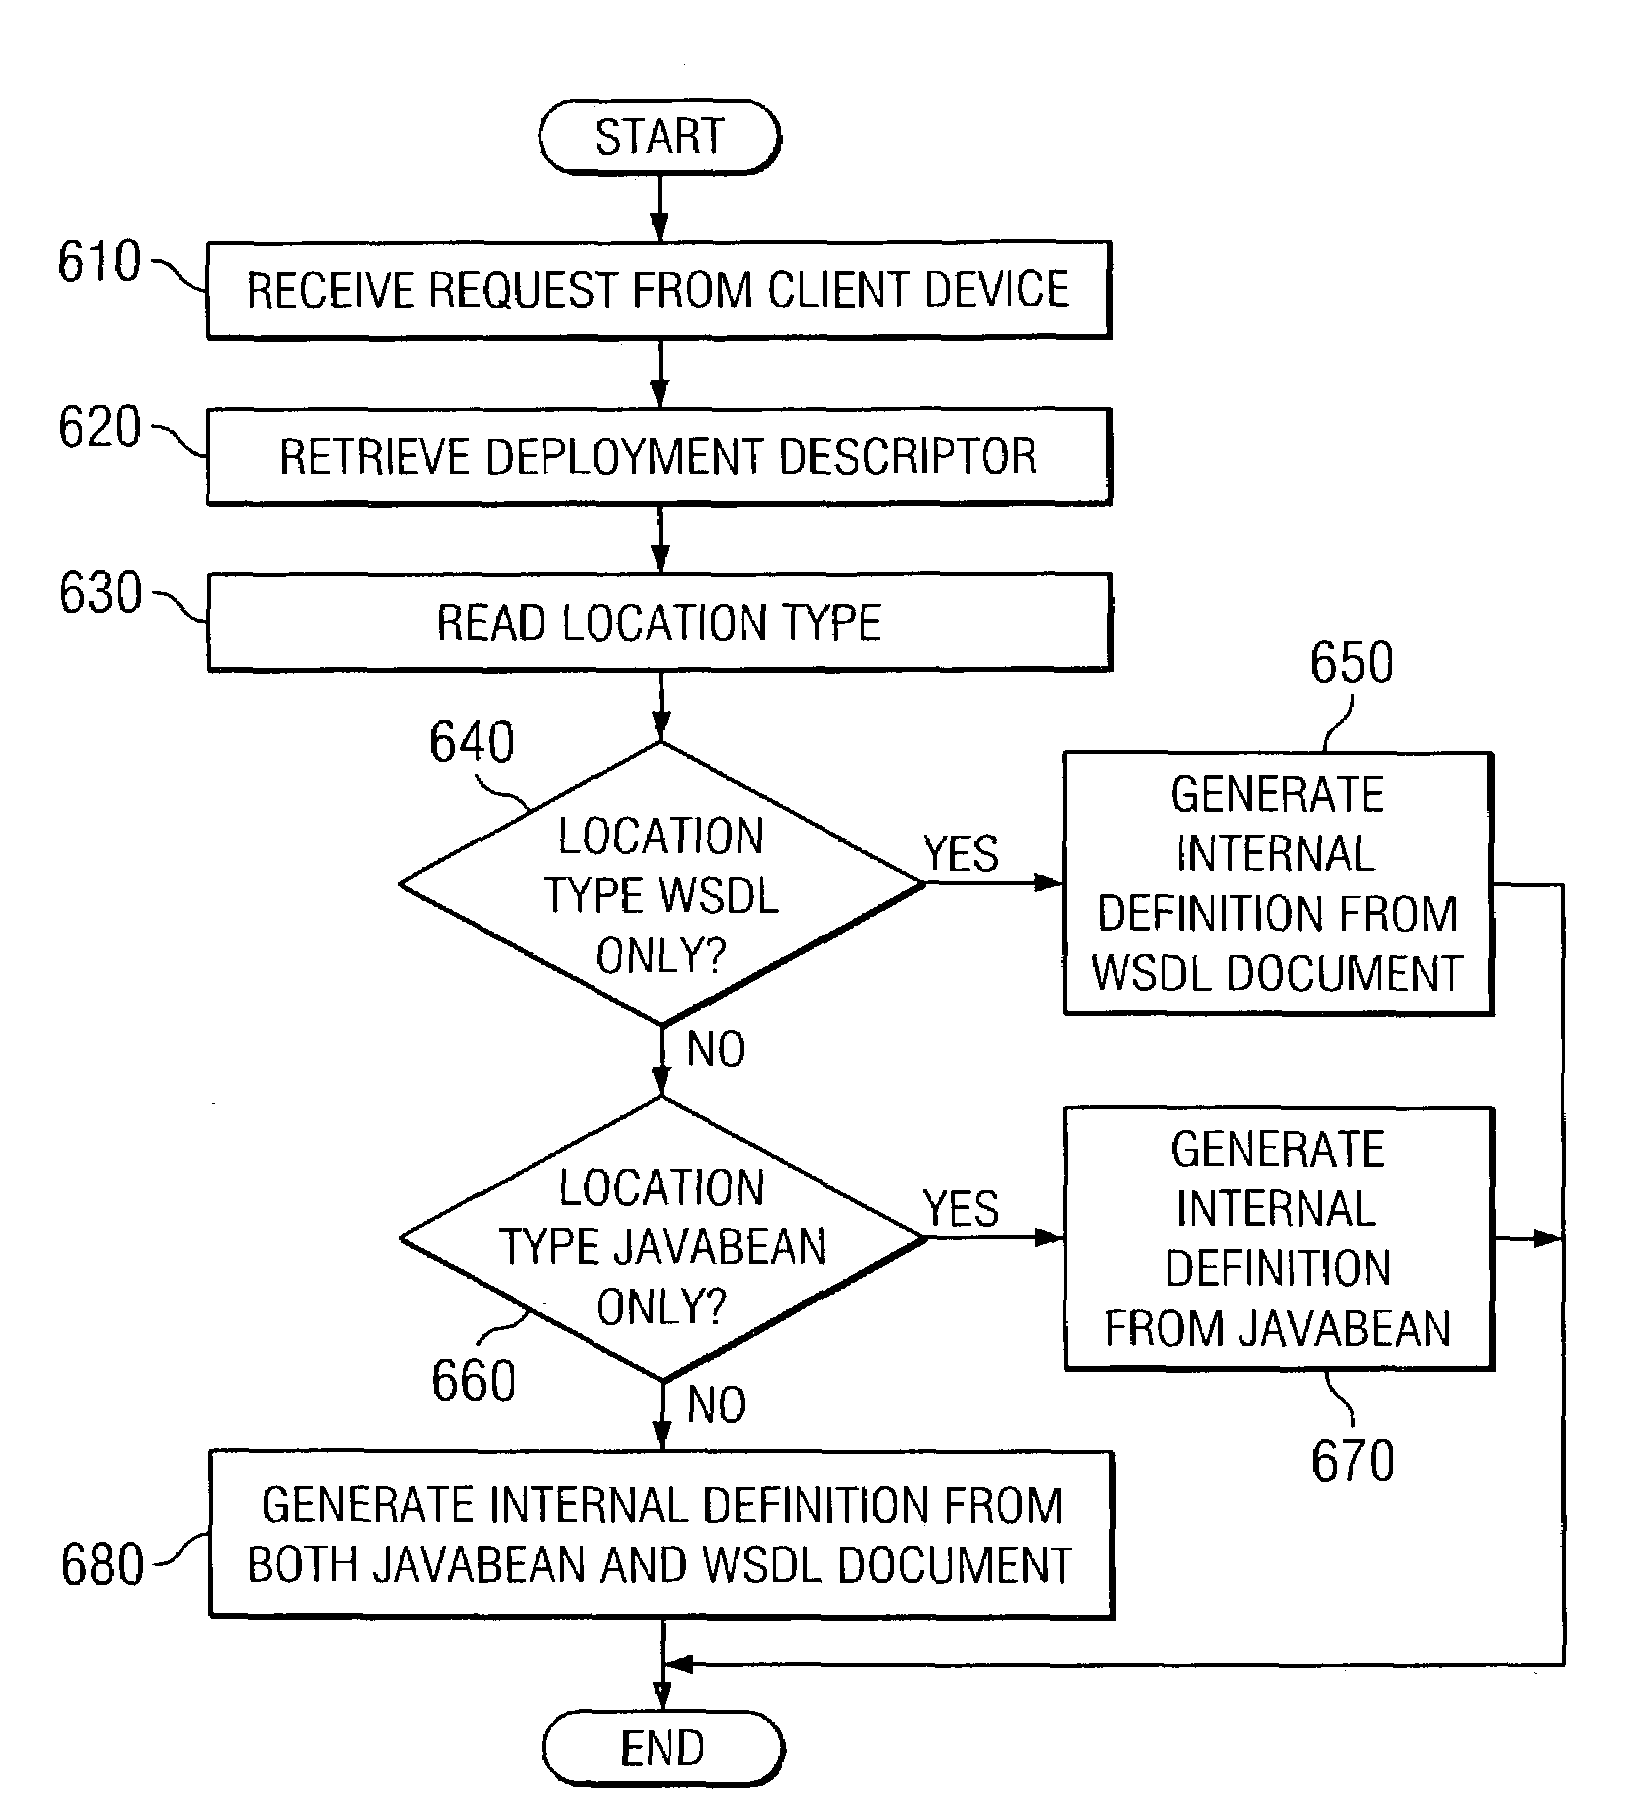 Apparatus and method for flexible web service deployment